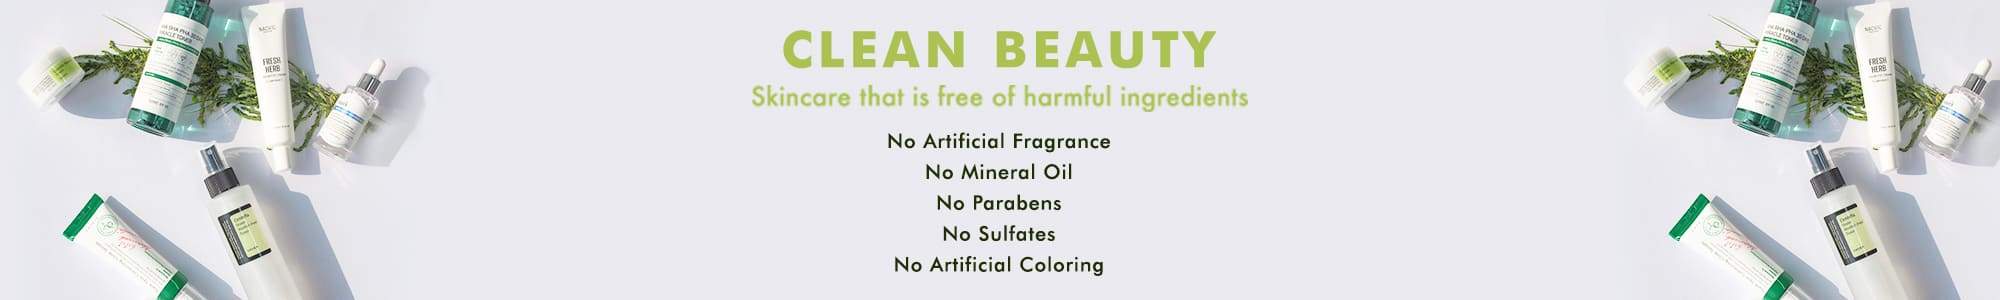 Clean Beauty - All Natural Ingredients